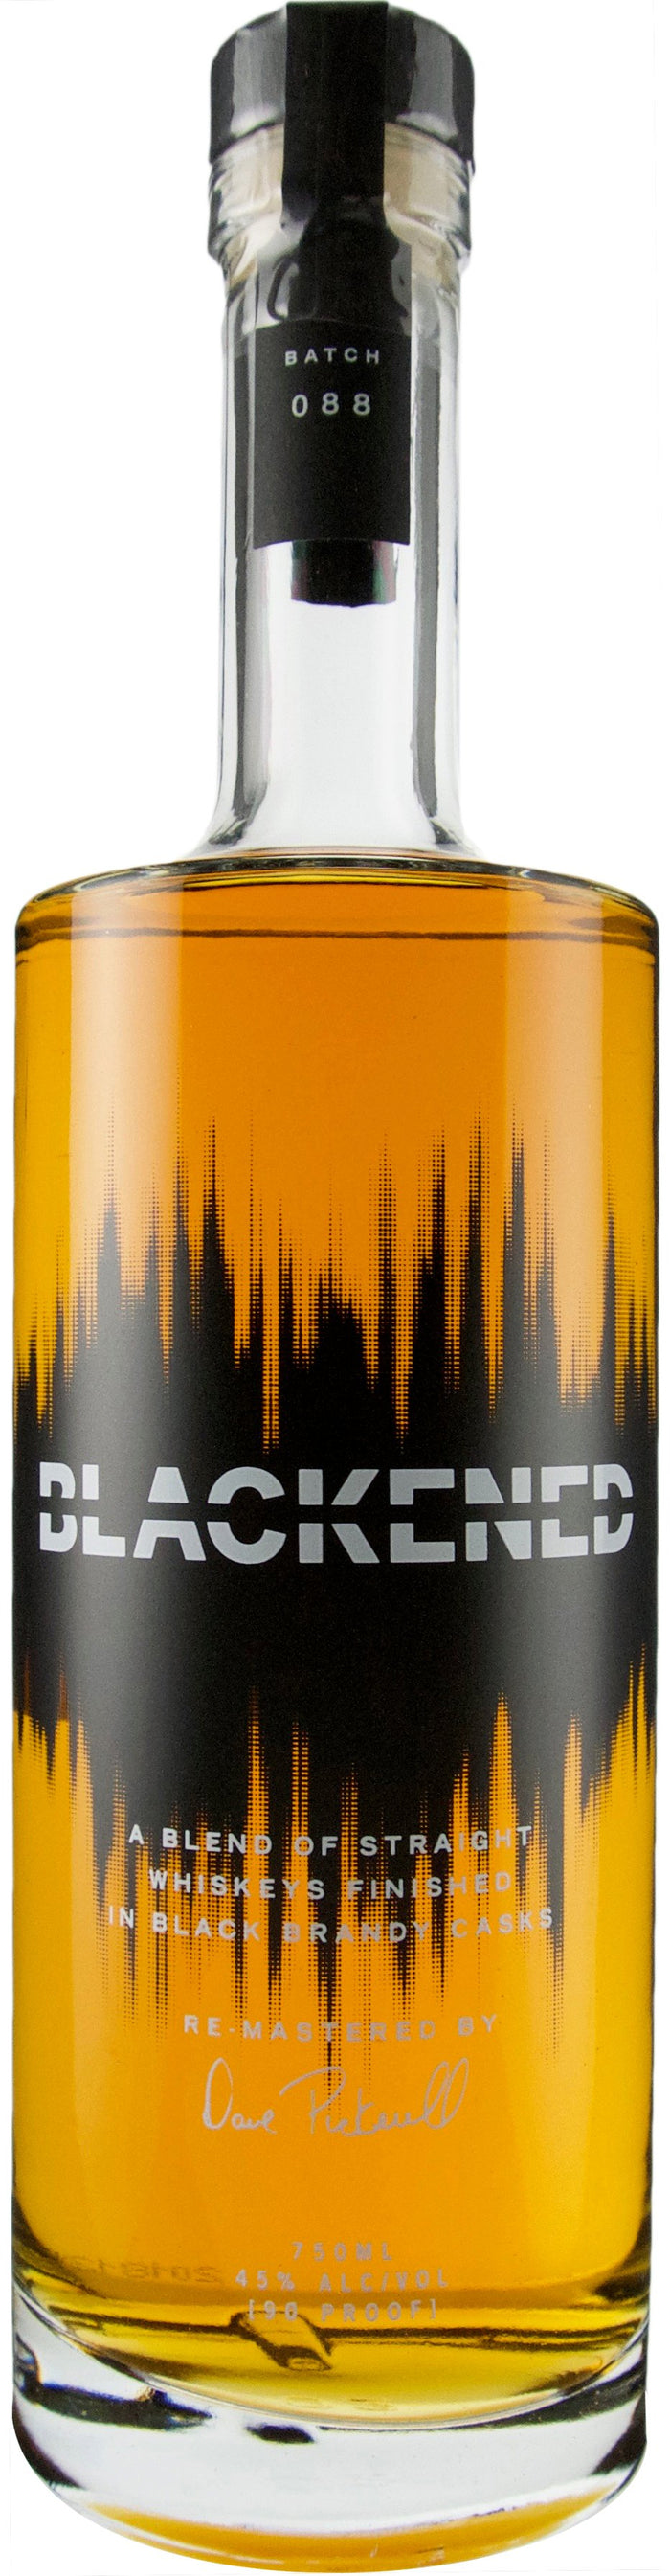 Blackened Blend of Straight Whiskies Finished in Black Brandy Casks Whiskey